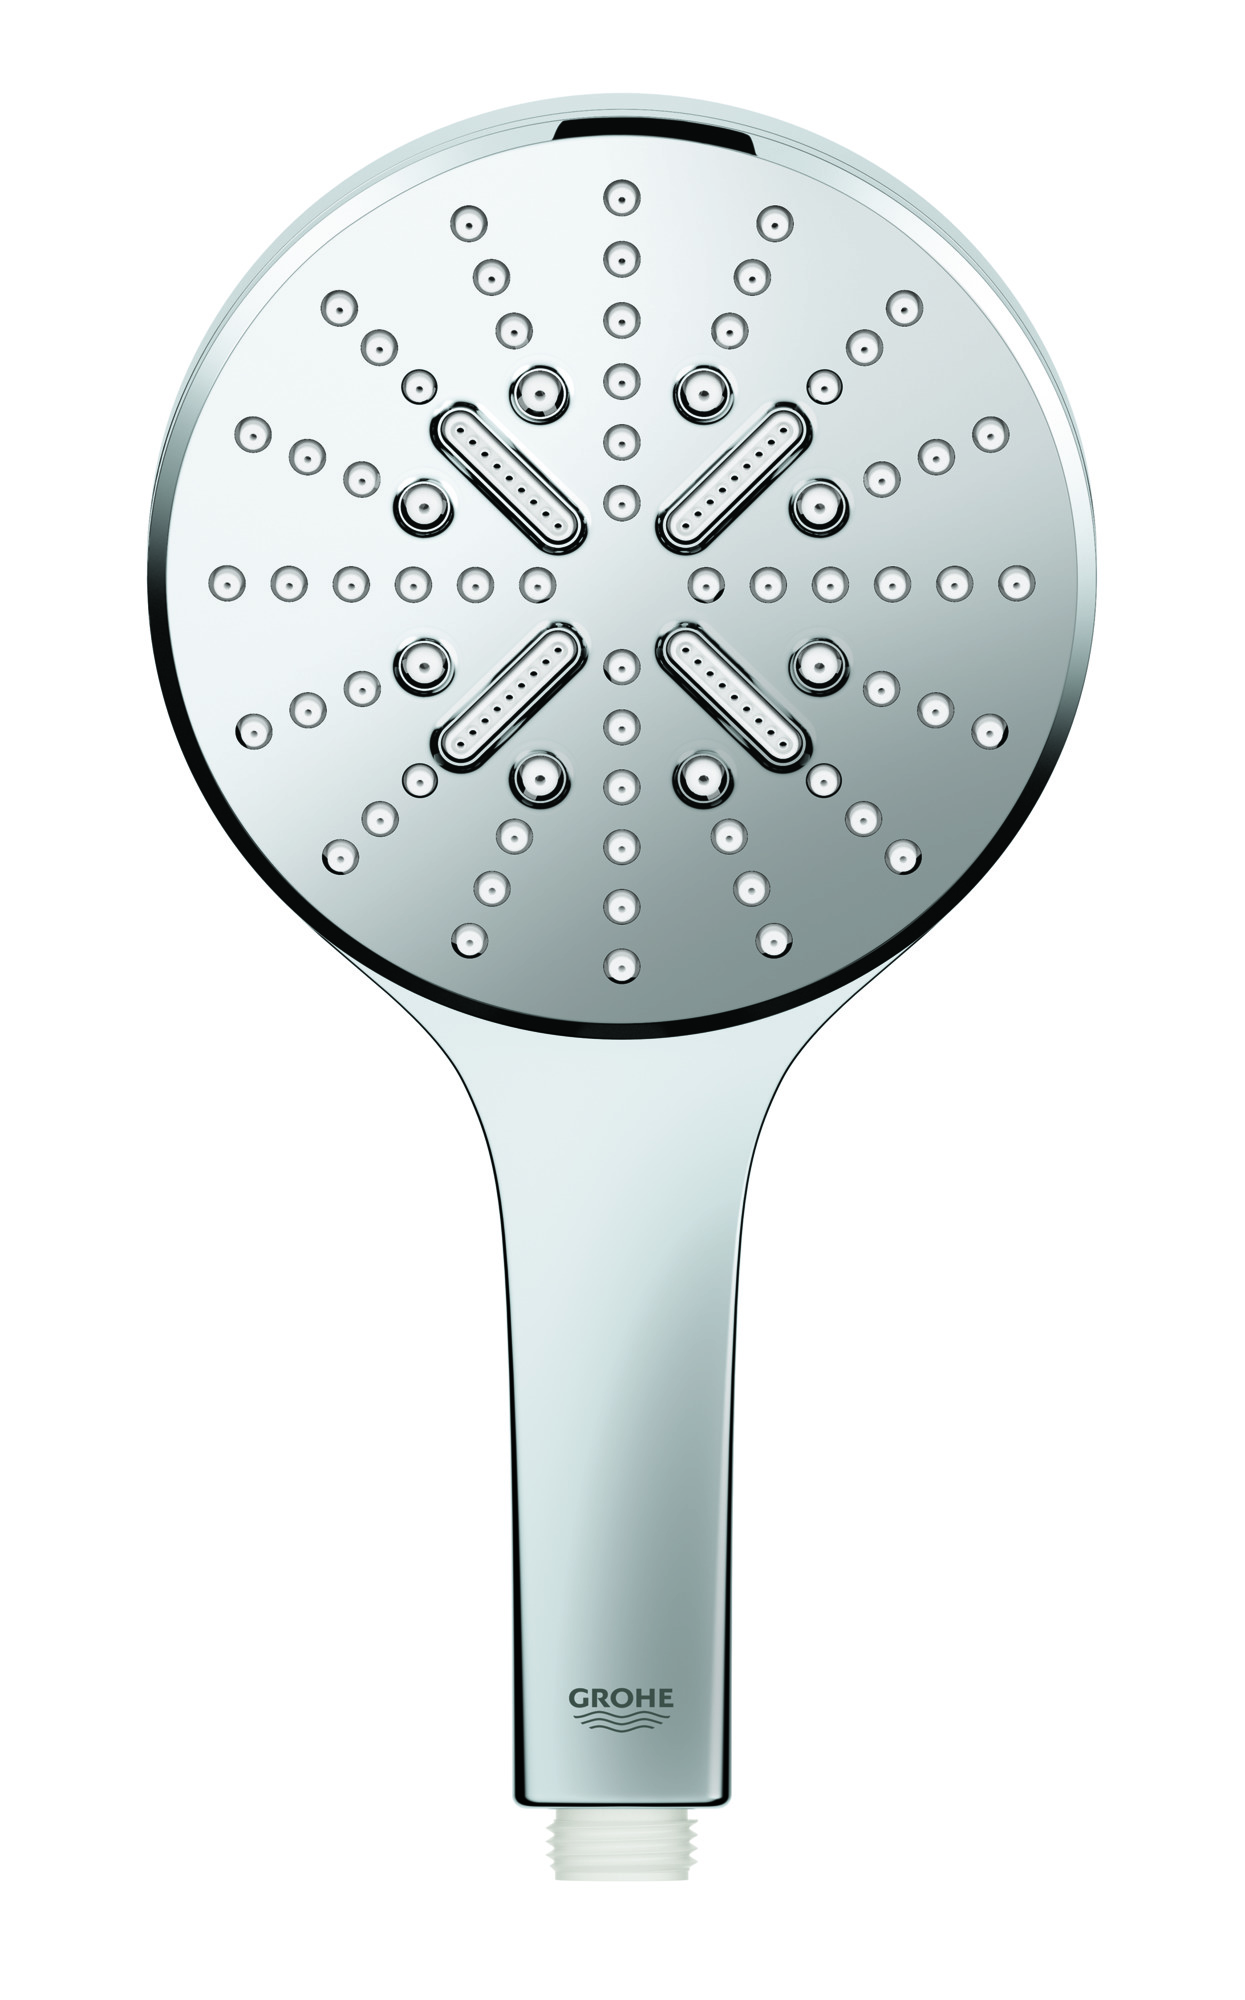 GROHE Rainshower Smartactive 3-Spray with 1.75 GPM 5 in. Wall Mount  Handheld Shower Head in StarLight Chrome 26545000 - The Home Depot